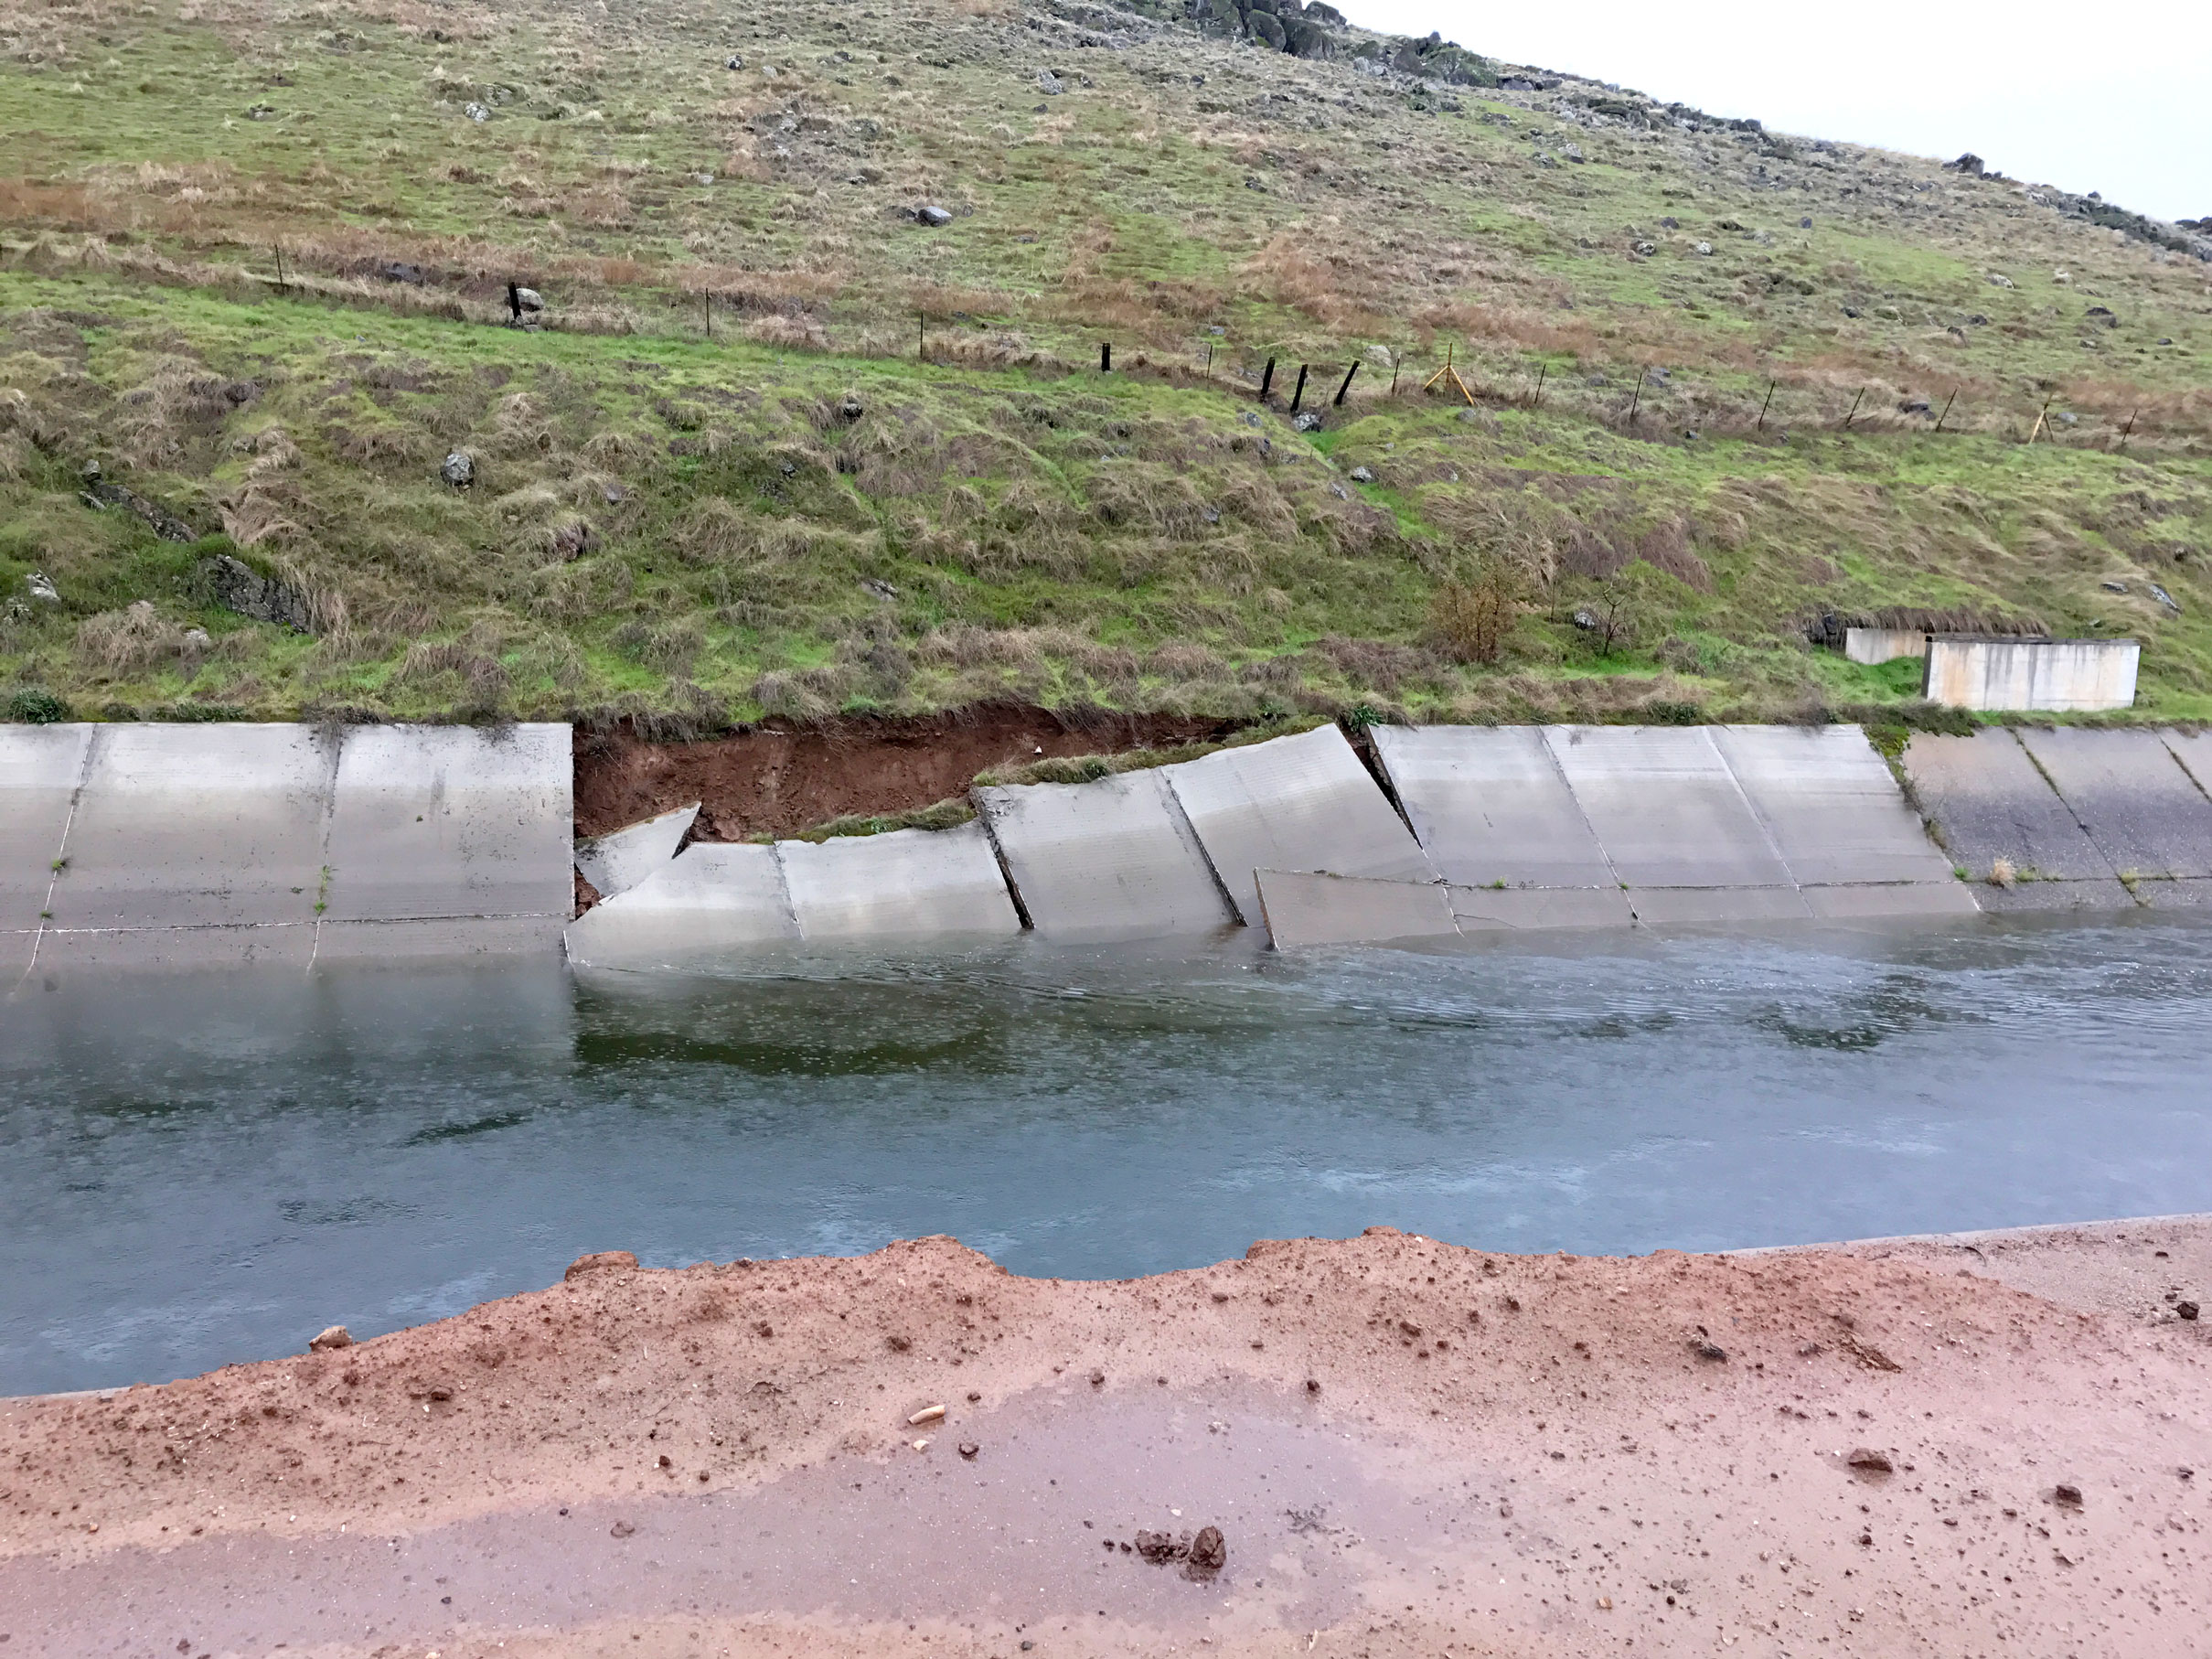  View of collapsed panels along the Friant Kern Canal in the Lindsay section 